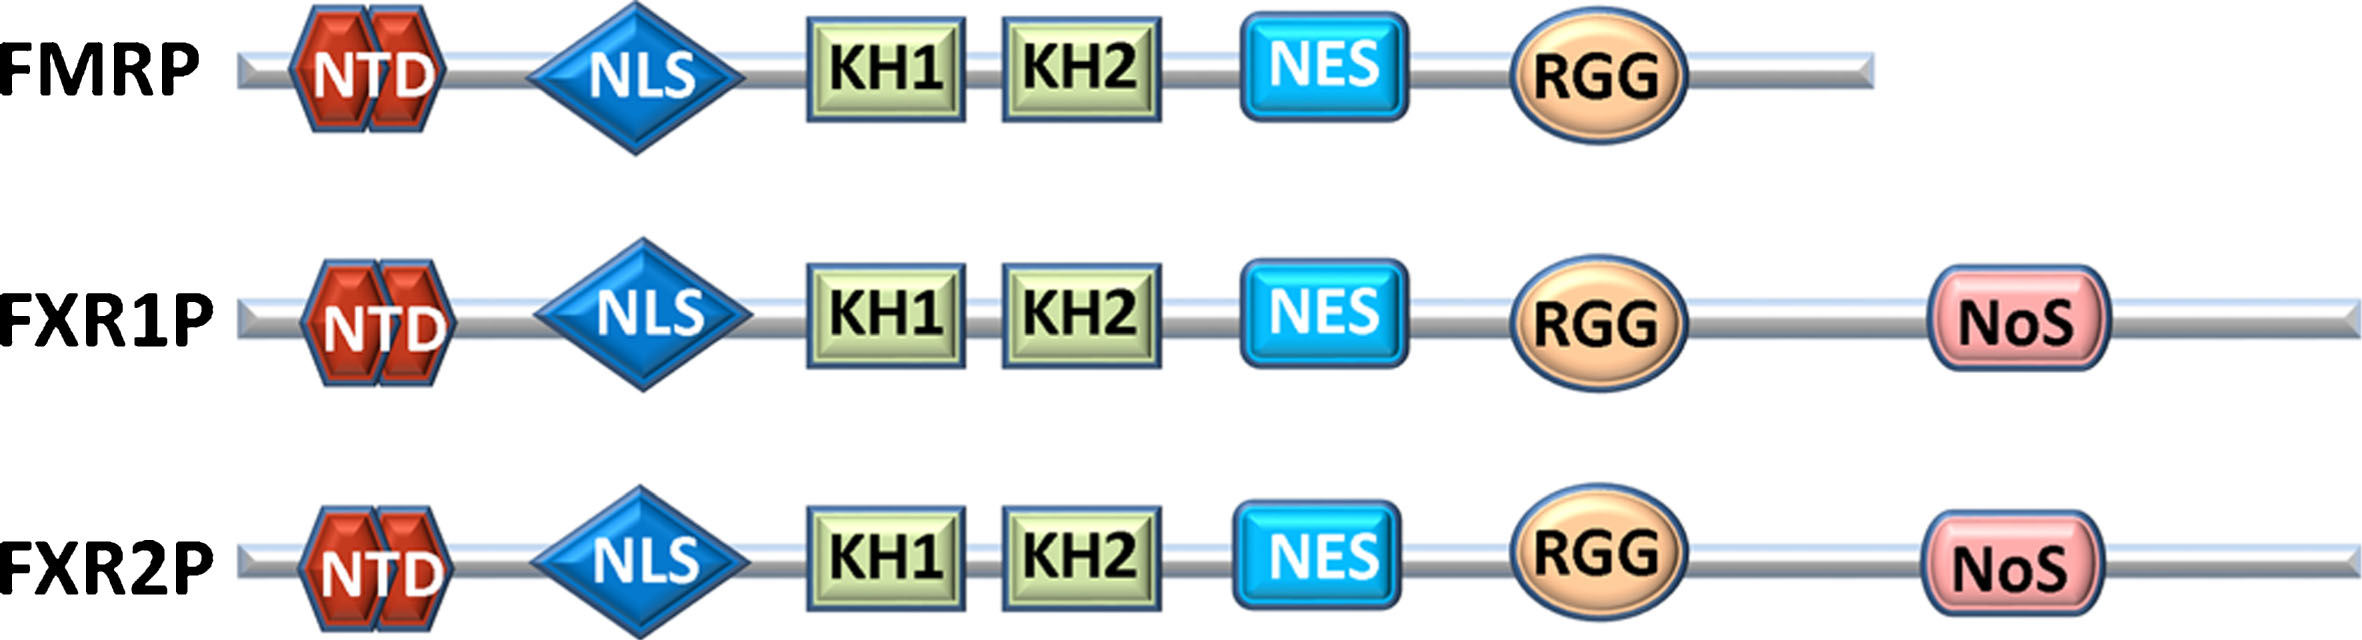 Comparison of human FXR proteins. NTD: N-terminal protein binding domain that contains two agenet domains; NLS: Nuclear localization sequence; KH1 & KH2: RNA-binding domains; NES: Nuclear export sequence; RGG: RNA-binding domain; NoS: Nucleolar localization sequence.